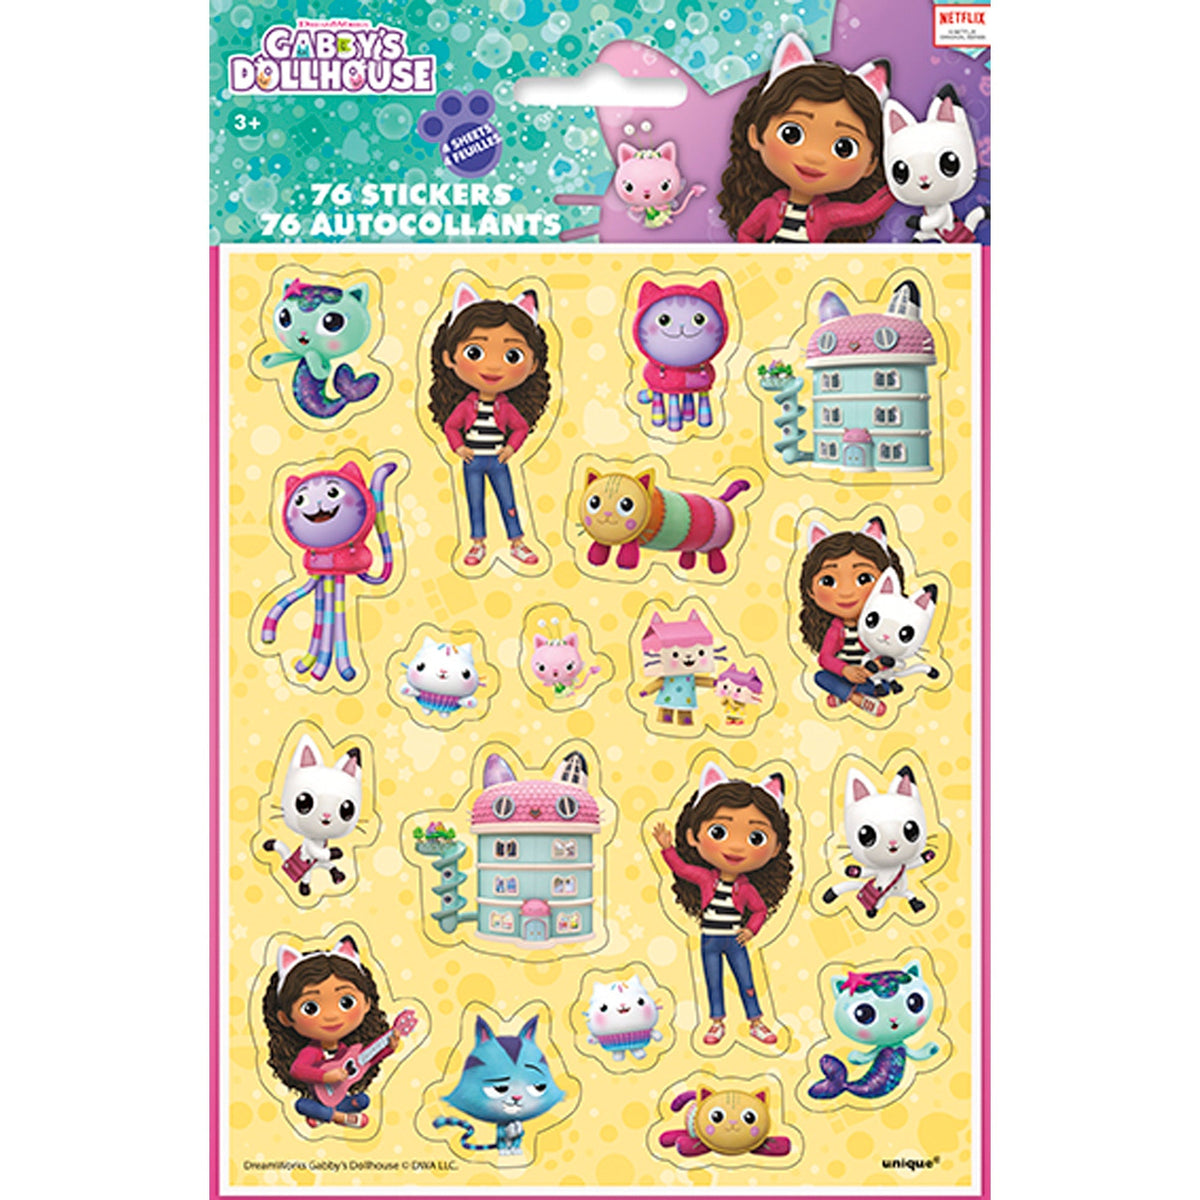 UNIQUE PARTY FAVORS Kids Birthday Gabby's Dollhouse Sticker Sheet, 76 Count 0011179298686